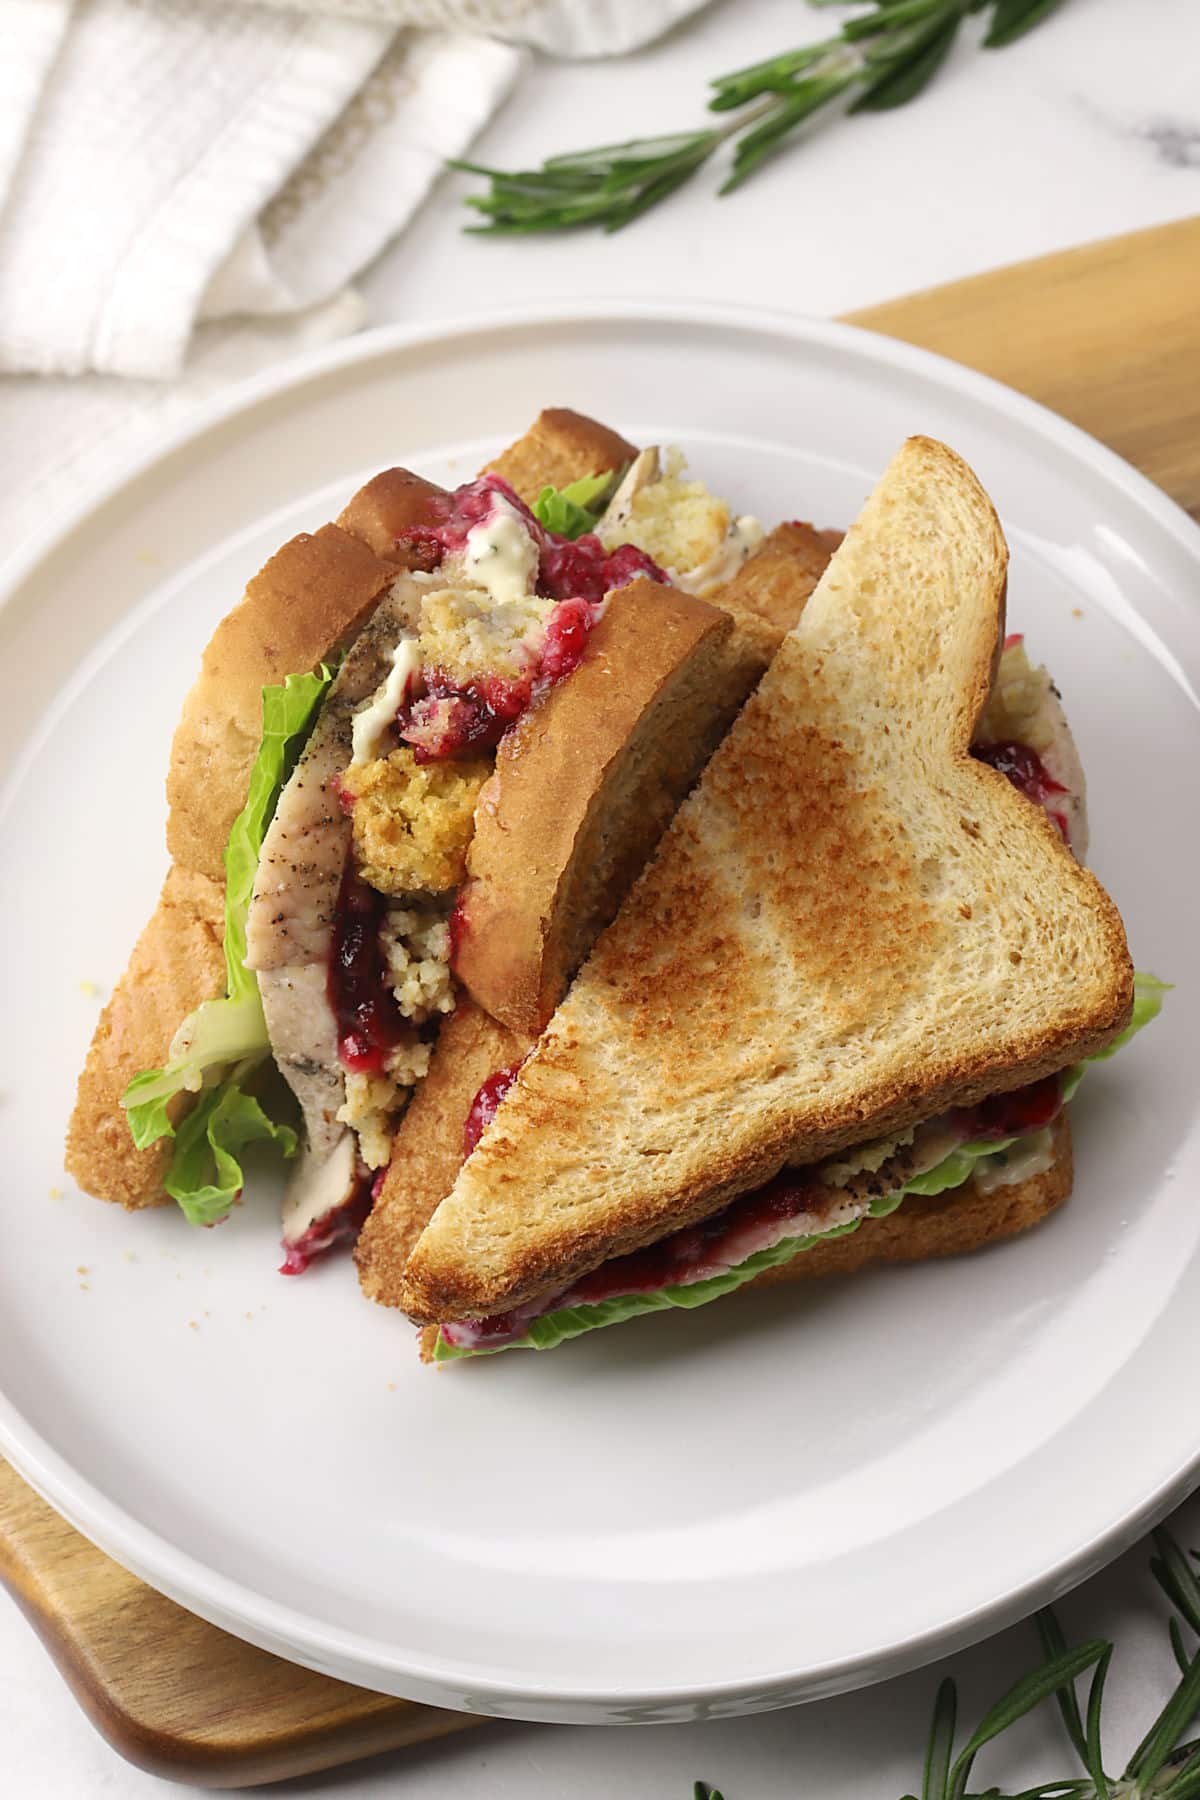 A turkey cranberry sandwich sliced in half on a white plate.